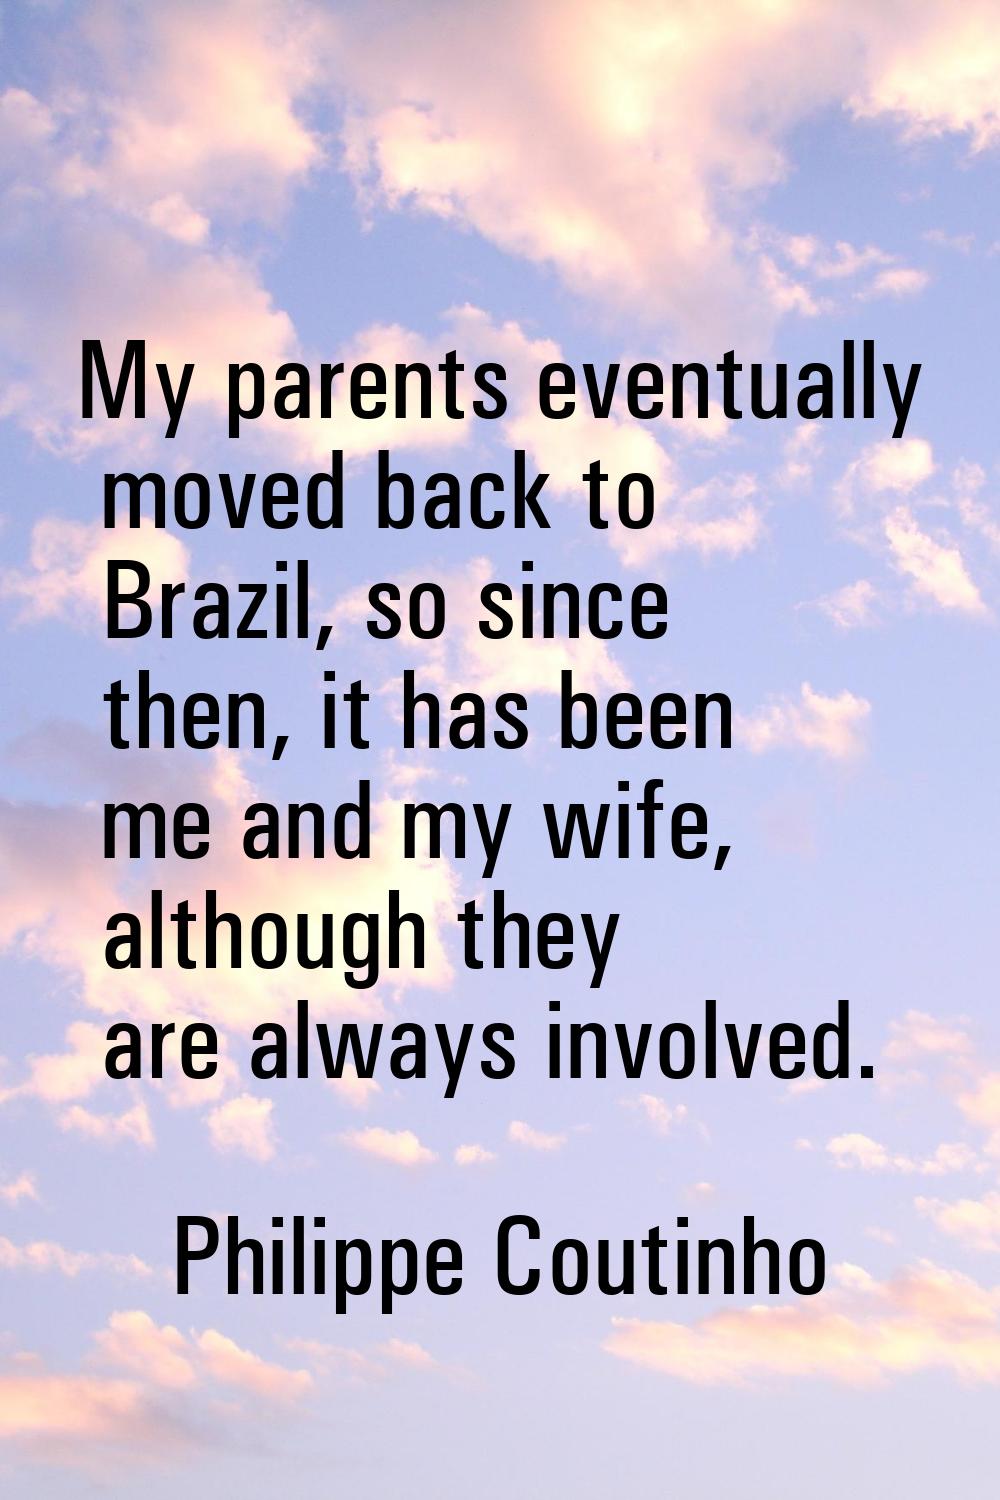 My parents eventually moved back to Brazil, so since then, it has been me and my wife, although the